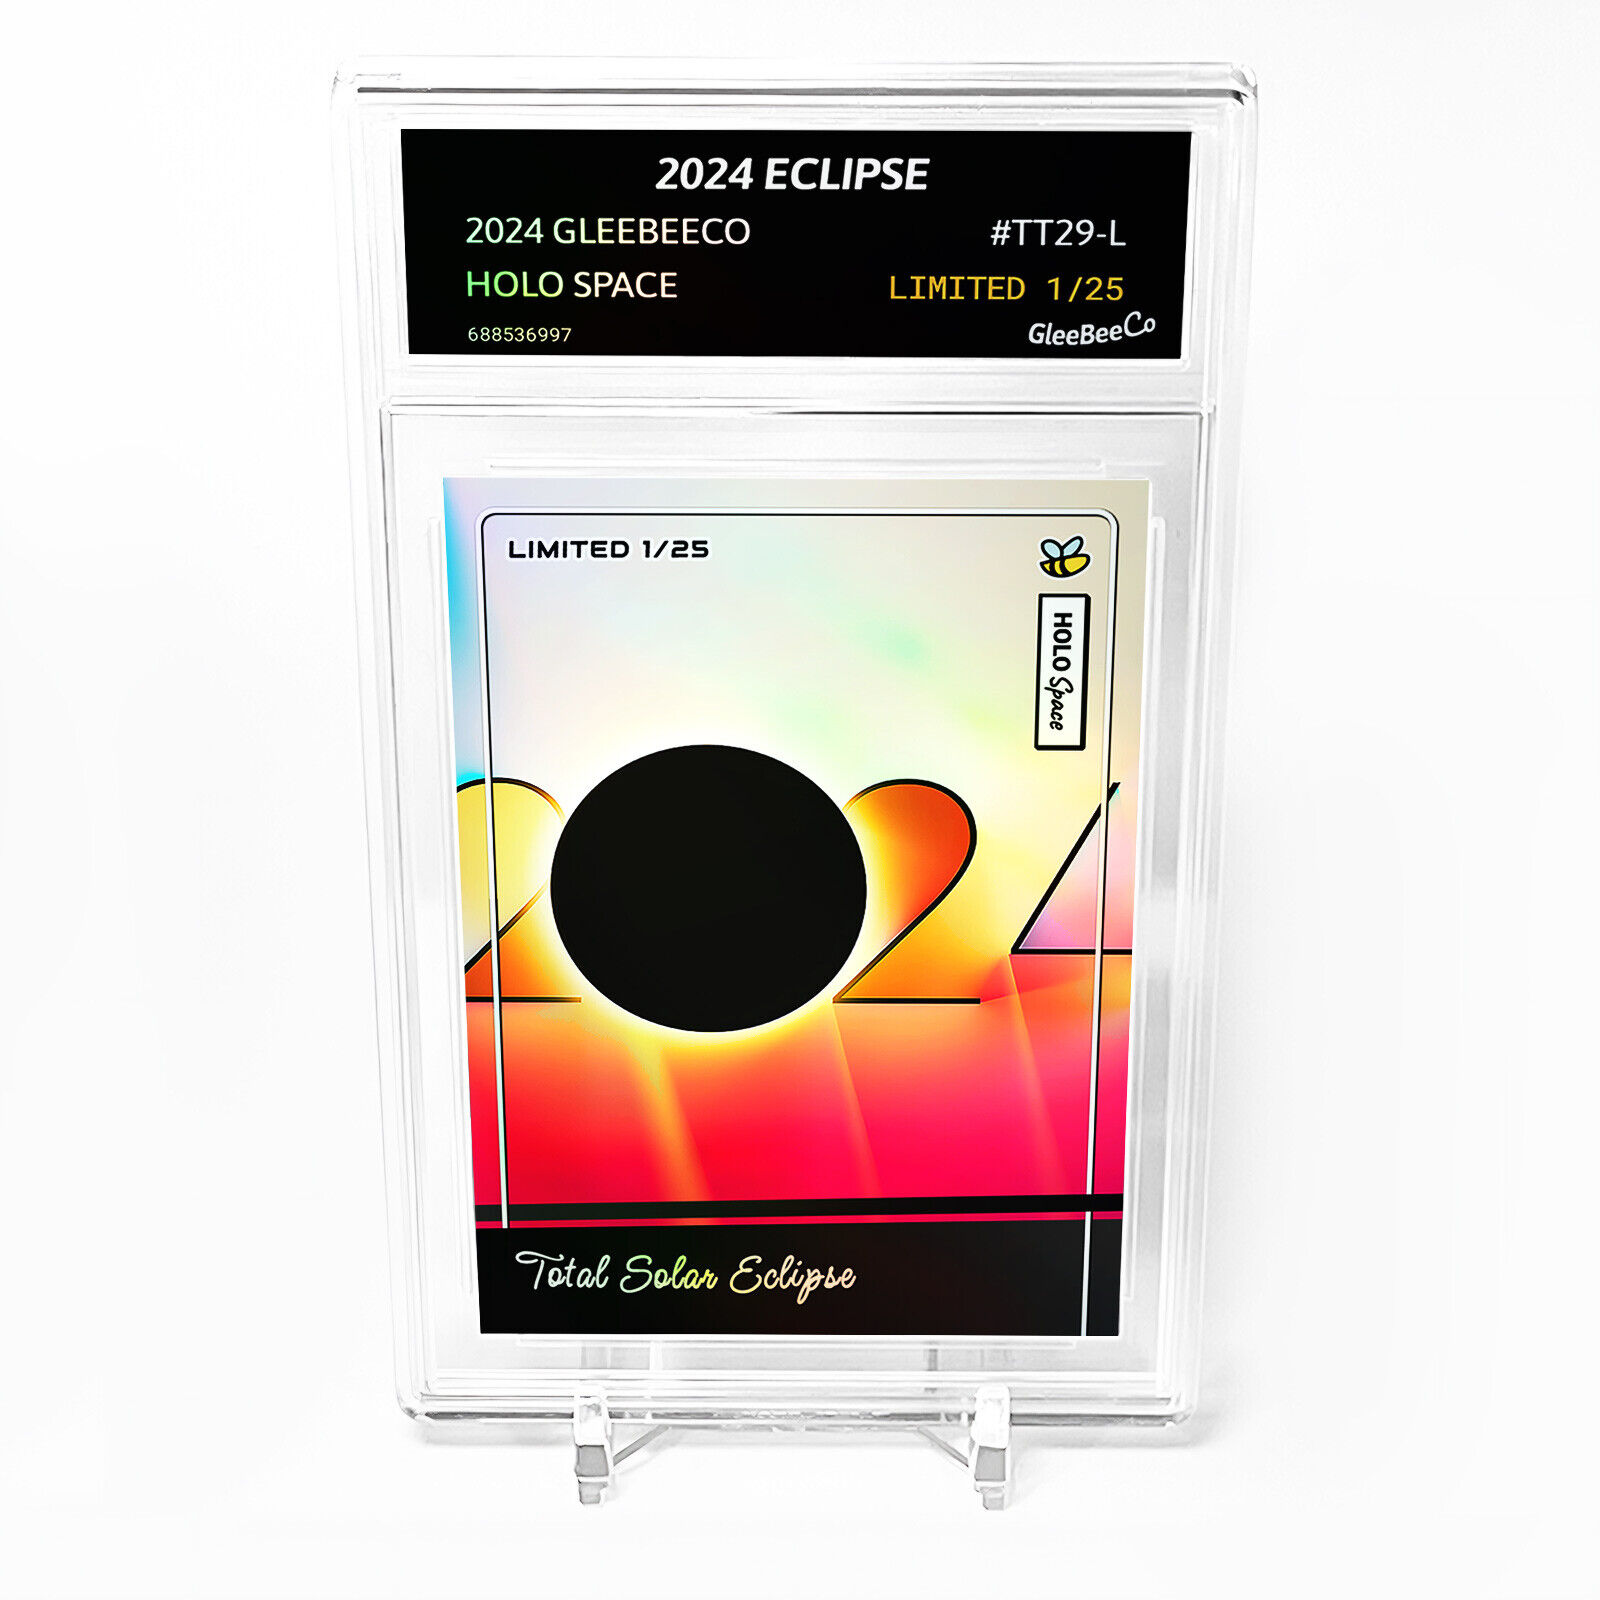 TOTAL SOLAR ECLIPSE Card 2024 GleeBeeCo Holo Space #TT29-L /25